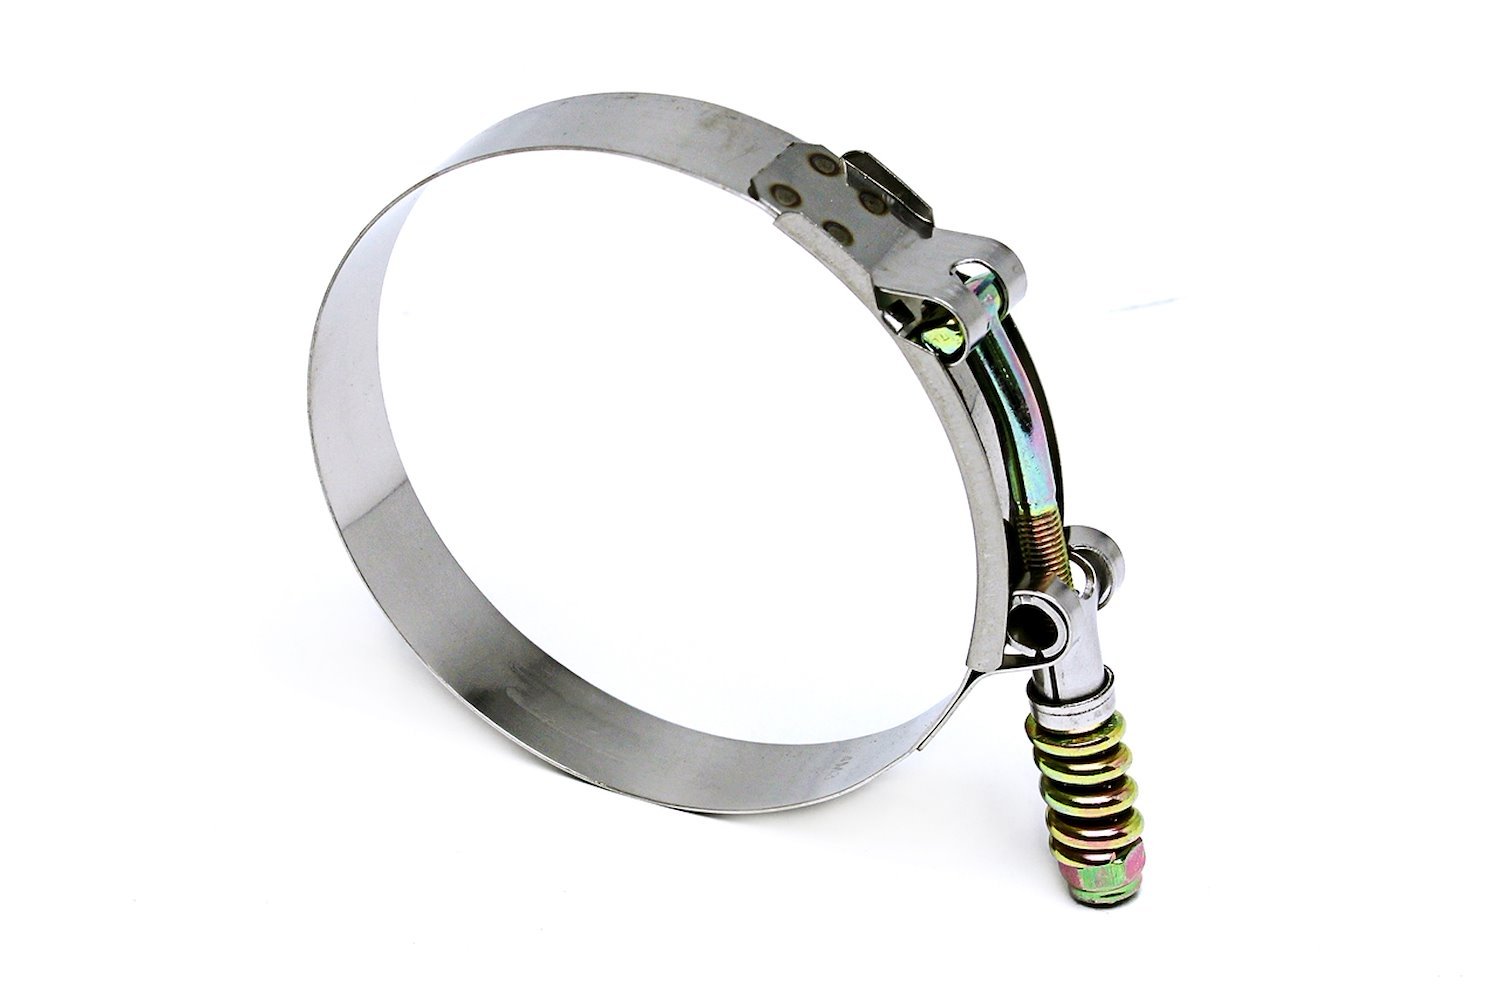 SLTC-275 Stainless Steel Spring Loaded T-Bolt Hose Clamp, Size #60, Range: 2.76 in.-3.07 in.